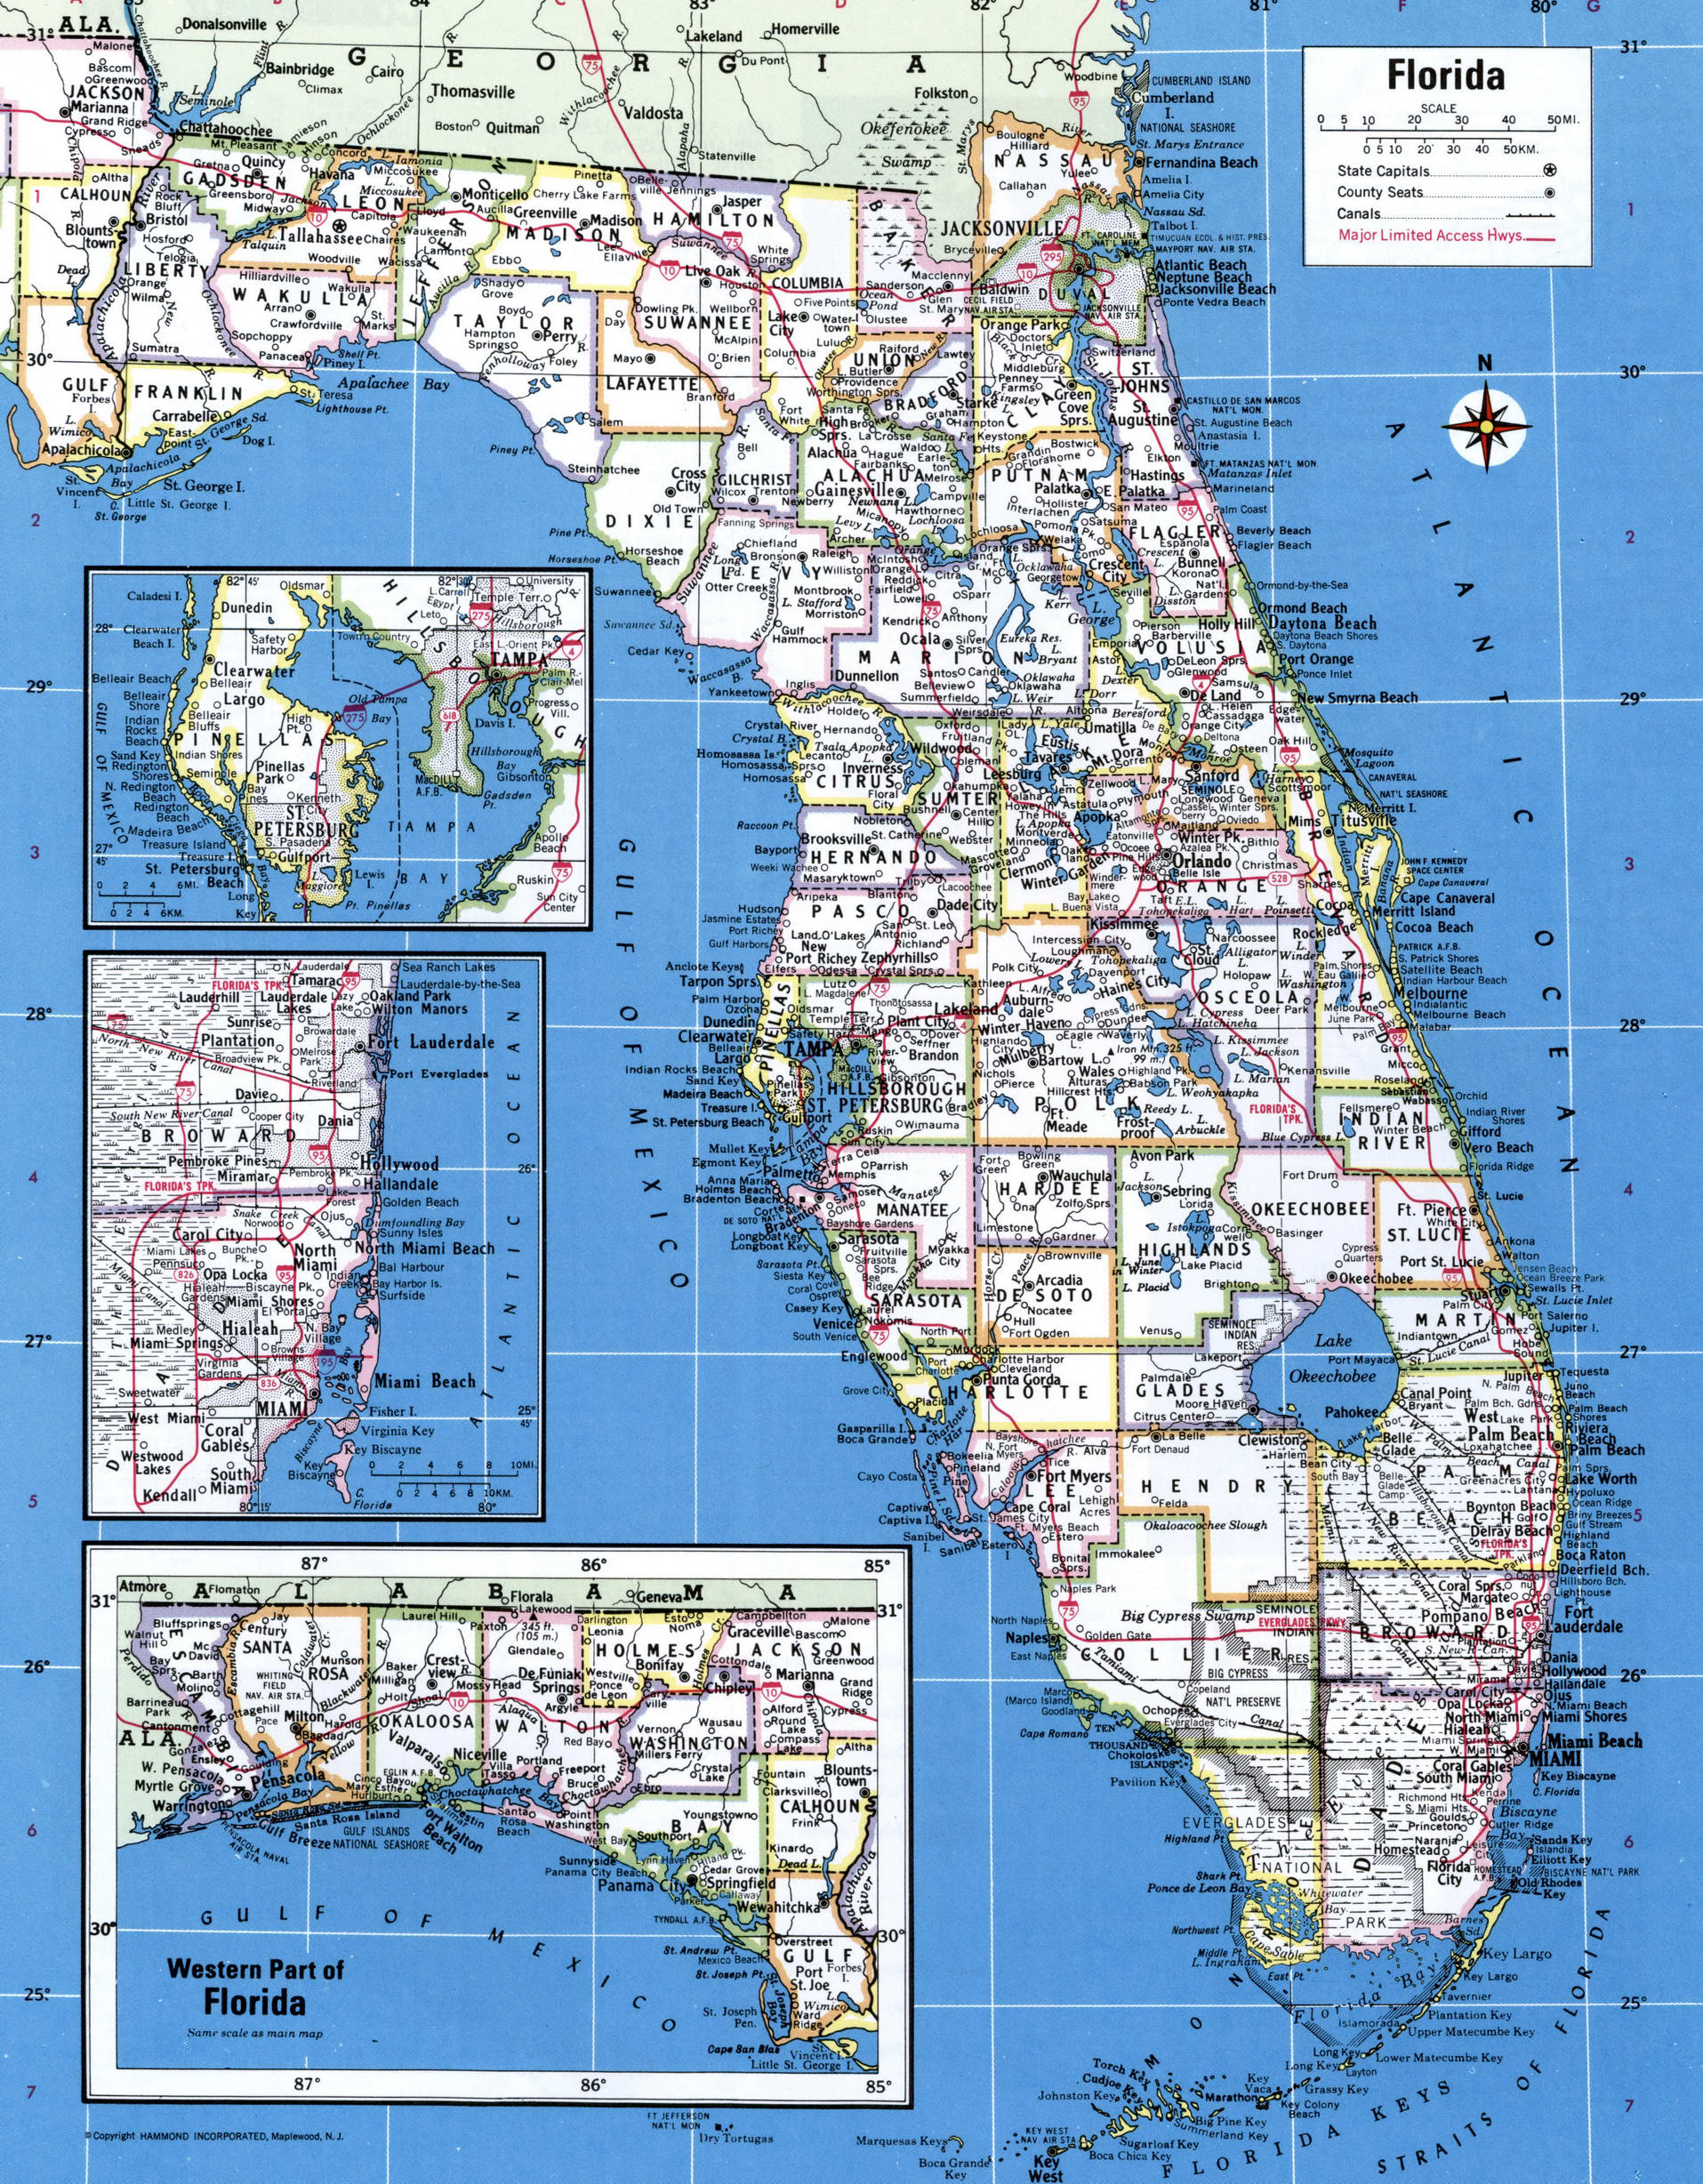 Florida map with counties